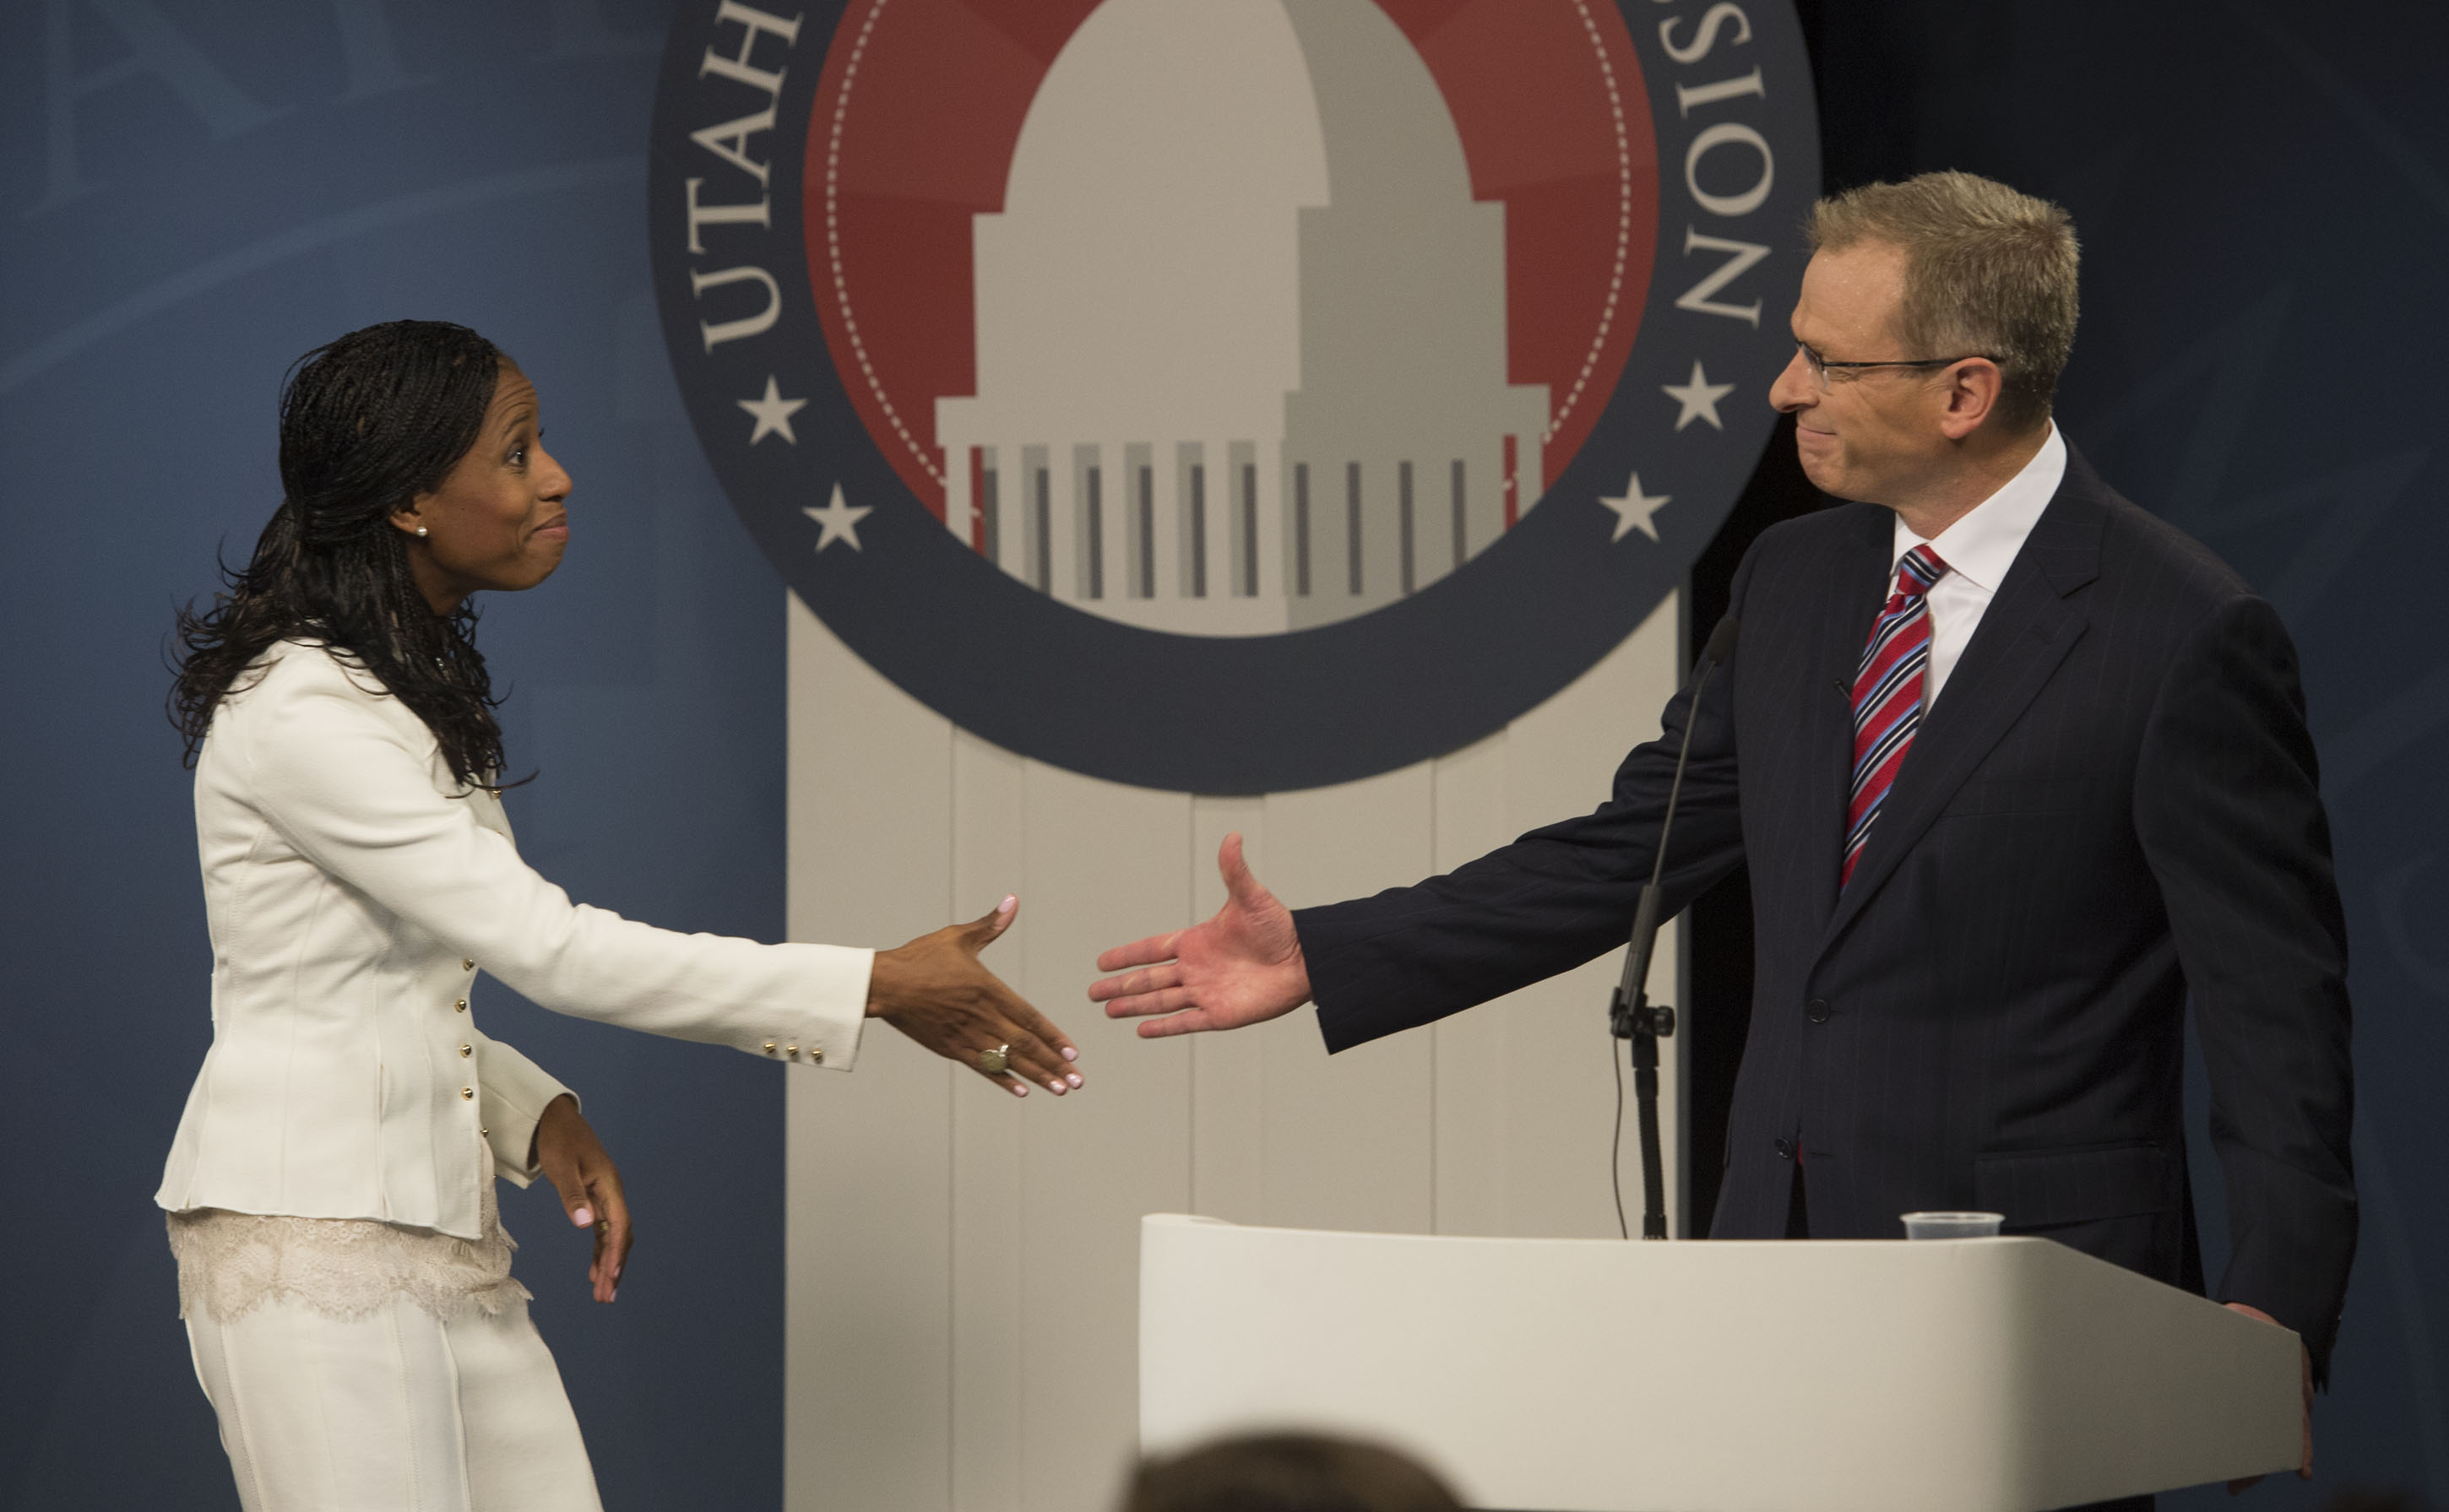 Mia Love shakes hands with Doug Owens following a debate in the 4th District, in Utah's premier congressional matchup at the Dolores Dor Eccles Broadcast Center on the University of Utah campus in Salt Lake City, Tuesday, October 14, 2014. (Credit: Steve Griffin, The Salt Lake Tribune)